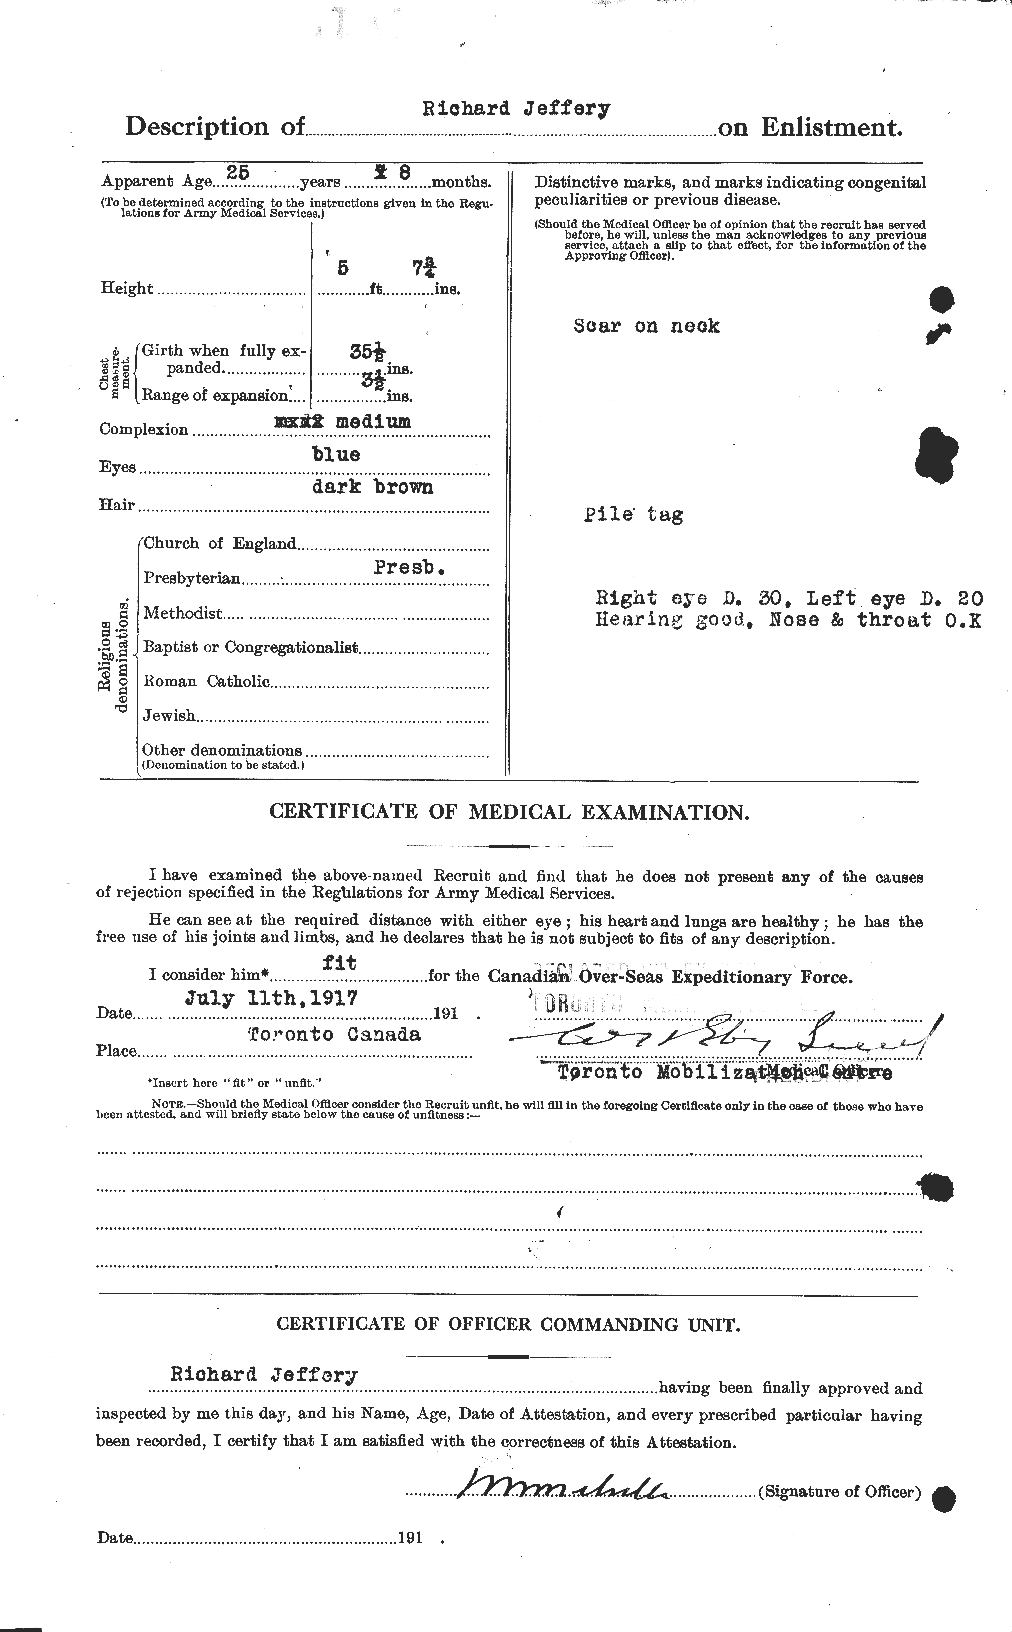 Personnel Records of the First World War - CEF 417795b